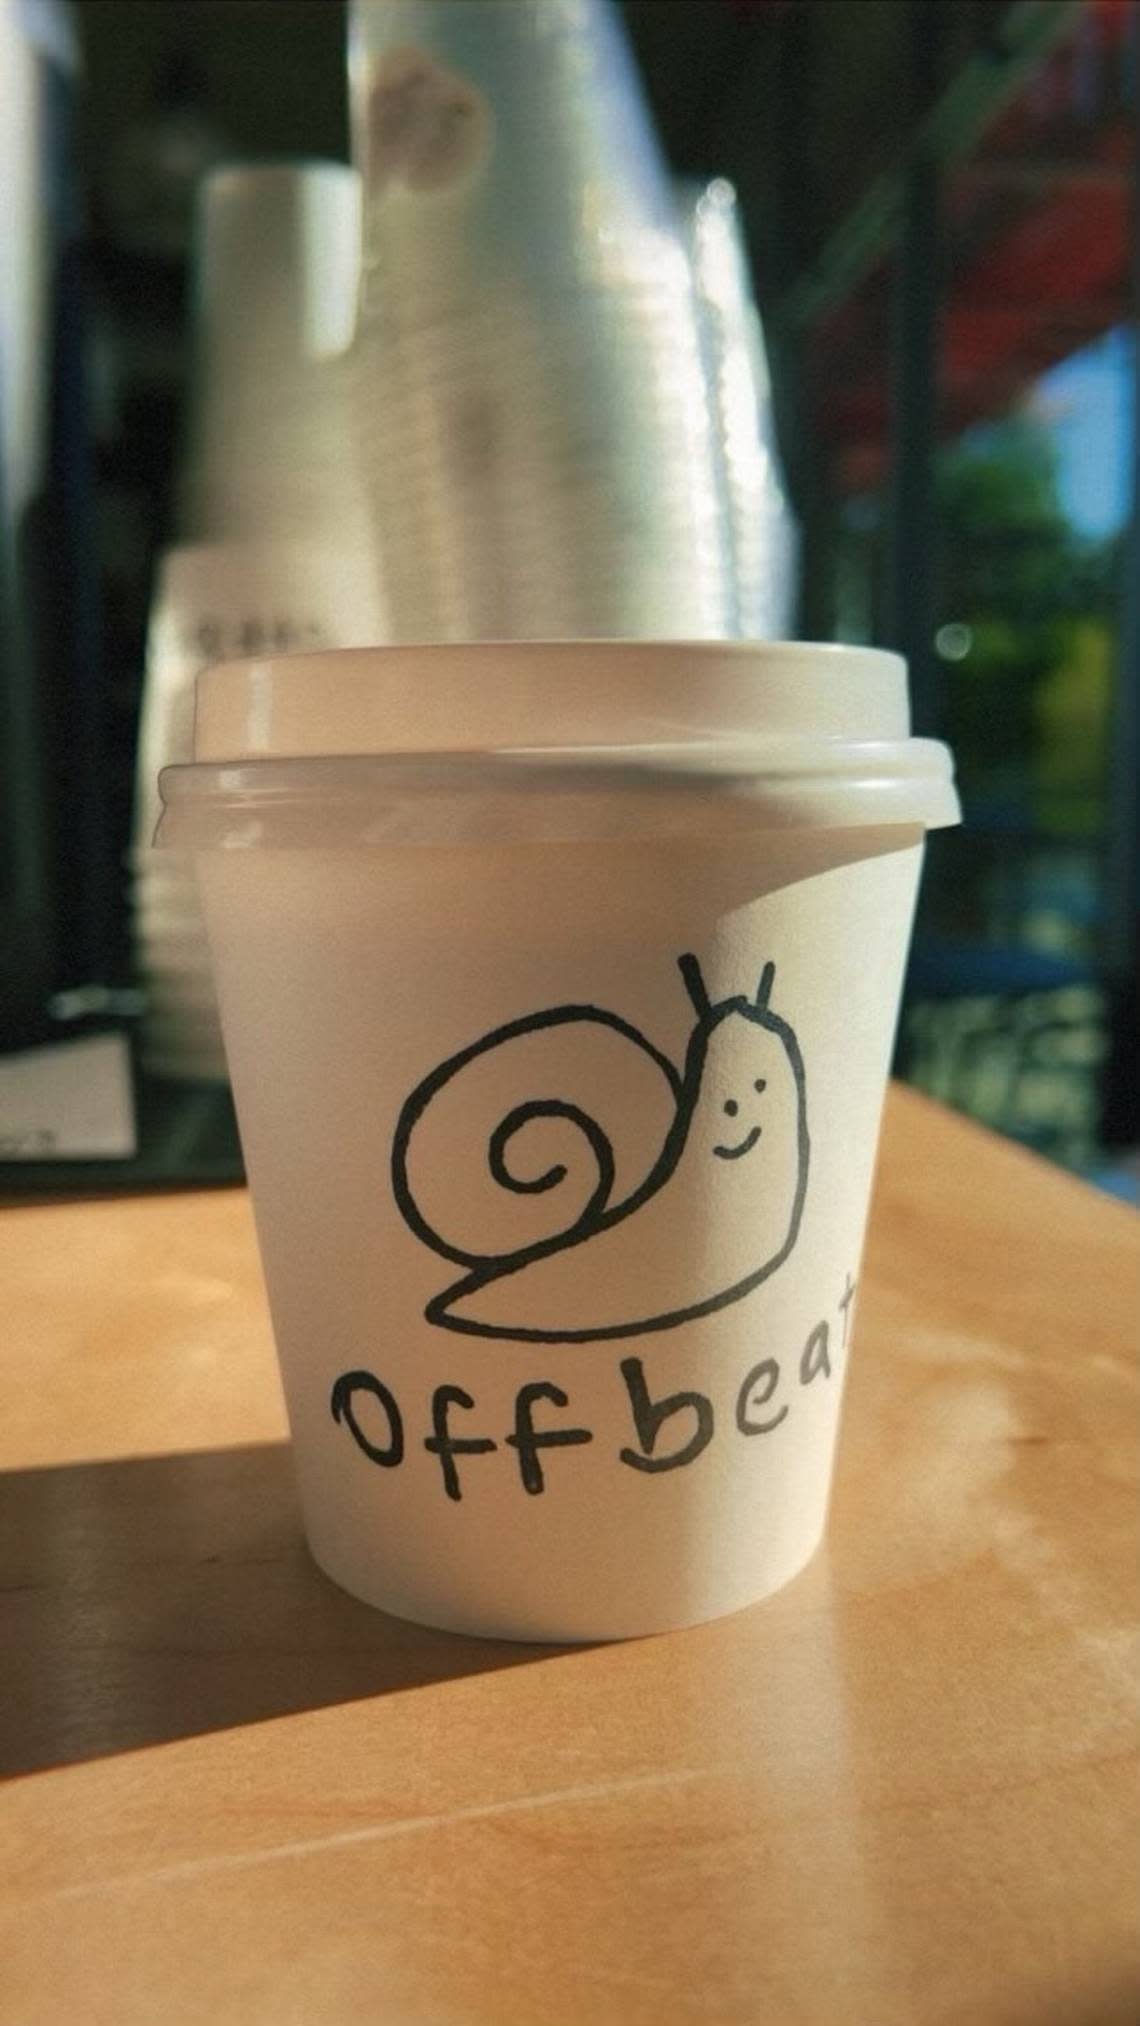 Offbeat Coffee will open in the summer of 2024 at 600 Broadway in Sacramento.